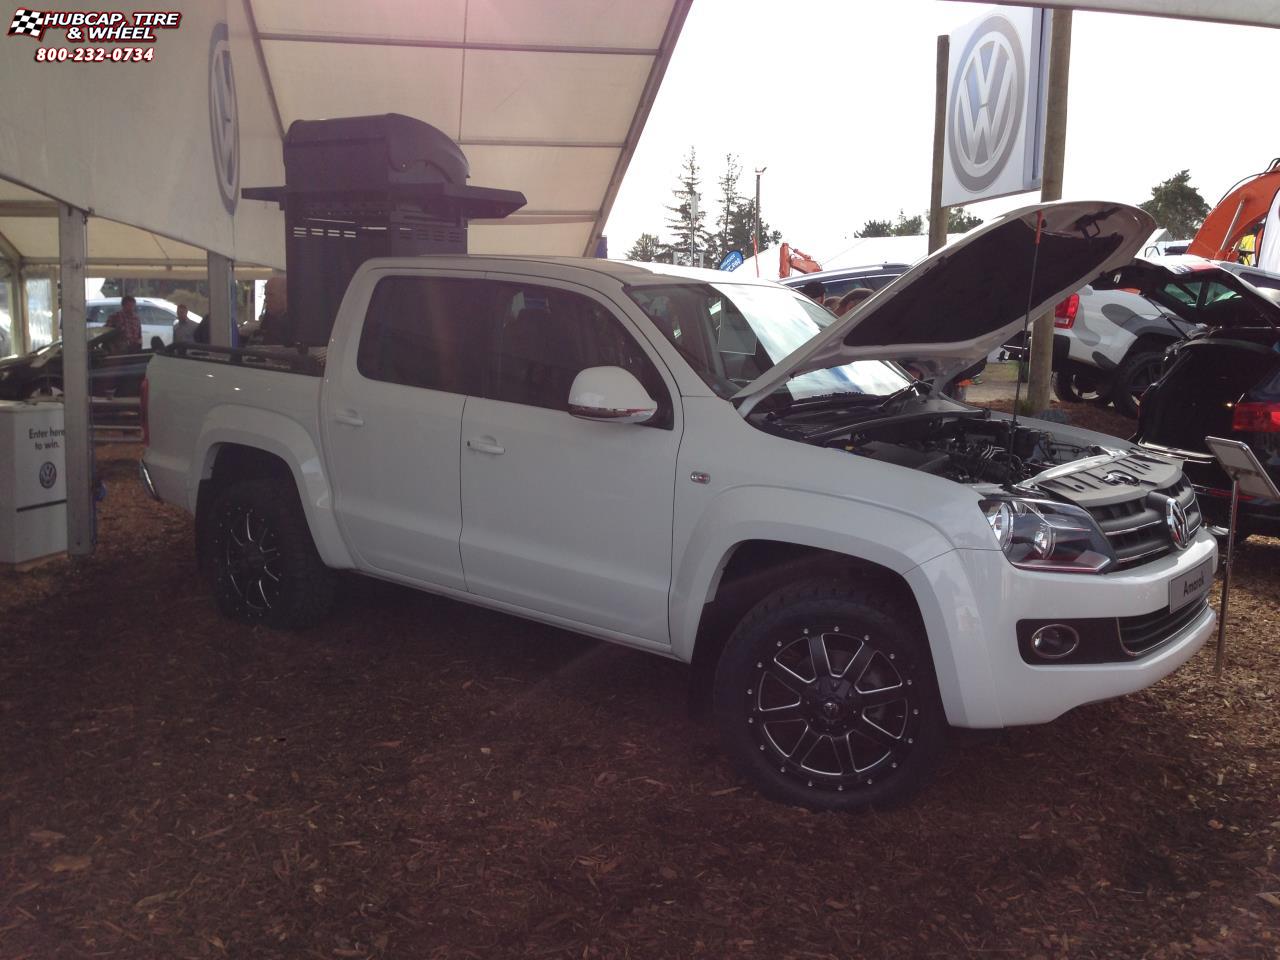 vehicle gallery/volkswagen amarok fuel frontier d535 20X9  Gloss Black with Milling wheels and rims